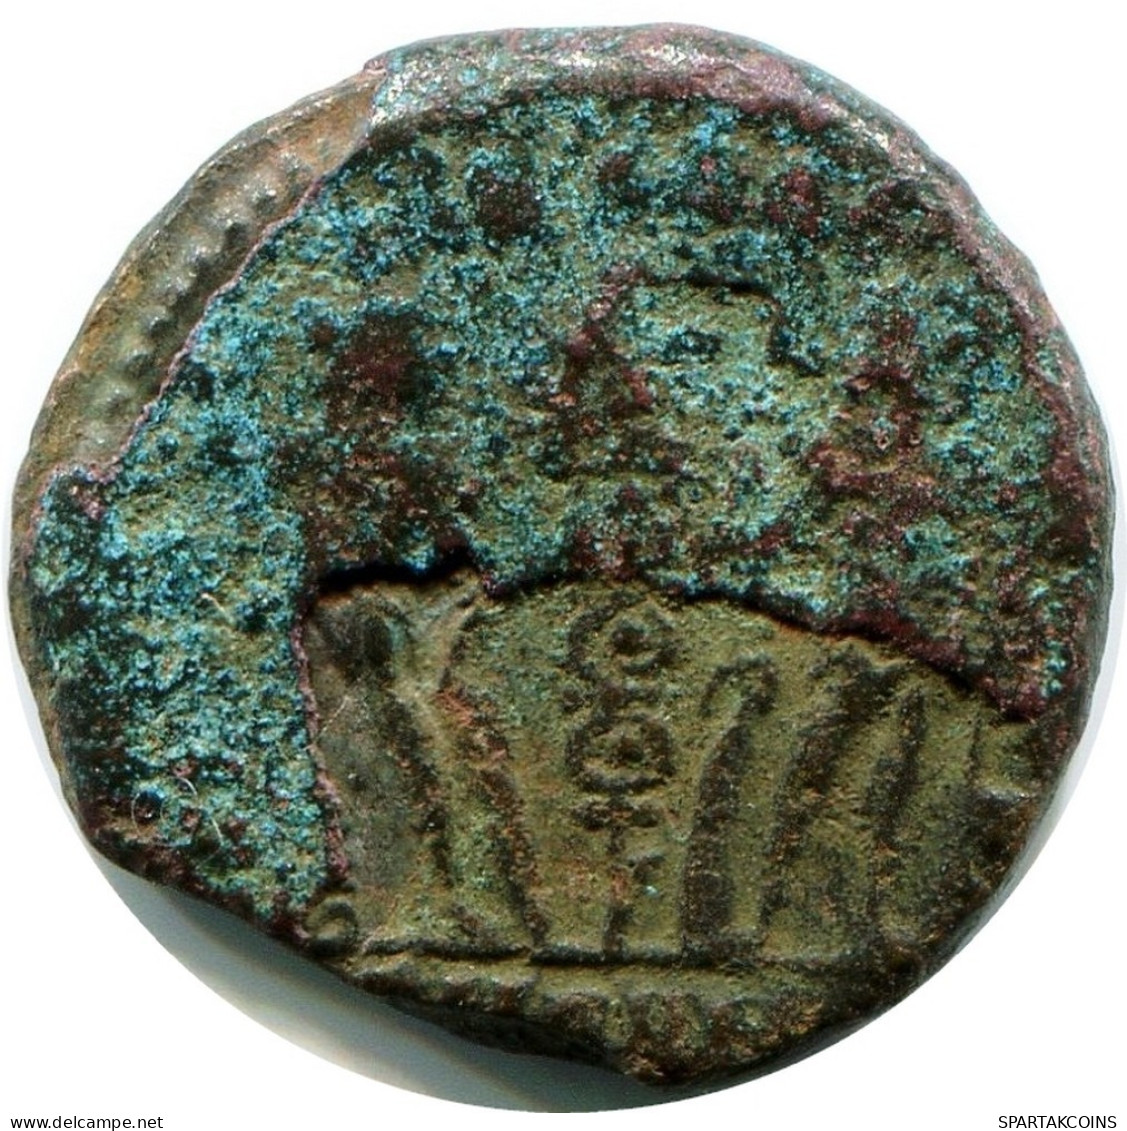 CONSTANS MINTED IN ANTIOCH FOUND IN IHNASYAH HOARD EGYPT #ANC11815.14.D.A - L'Empire Chrétien (307 à 363)